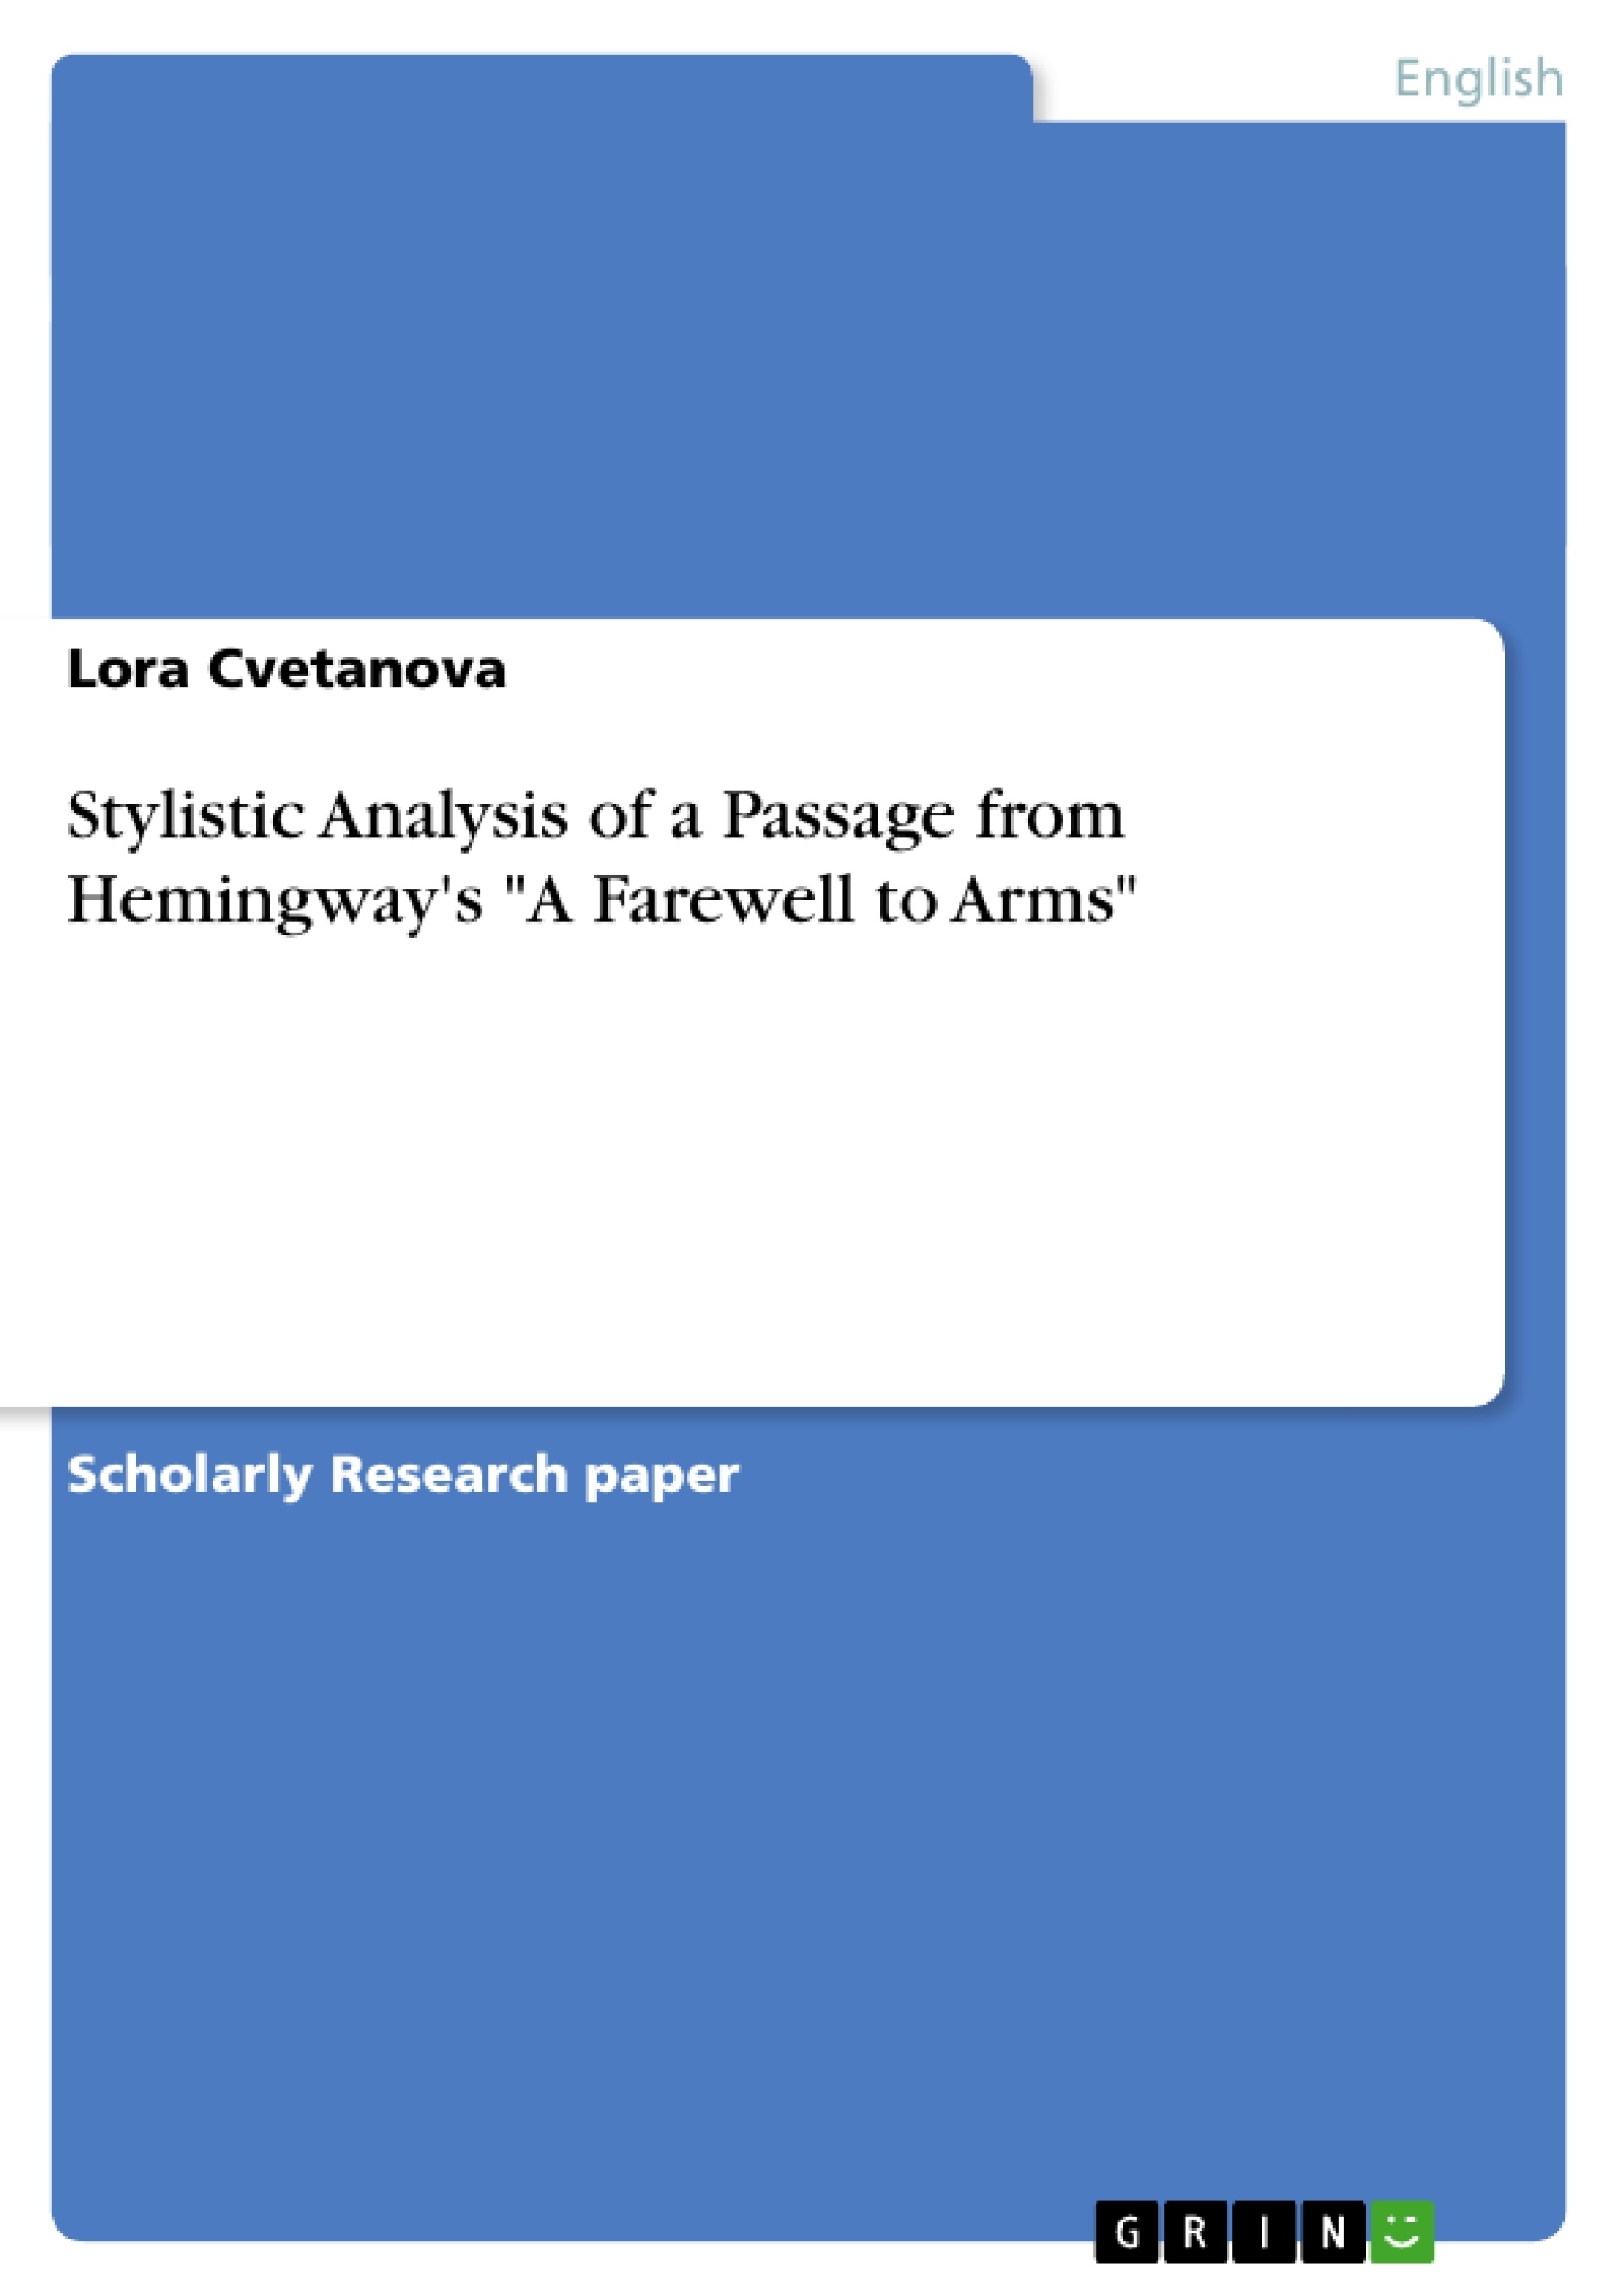 Título: Stylistic Analysis of a Passage from Hemingway's "A Farewell to Arms"